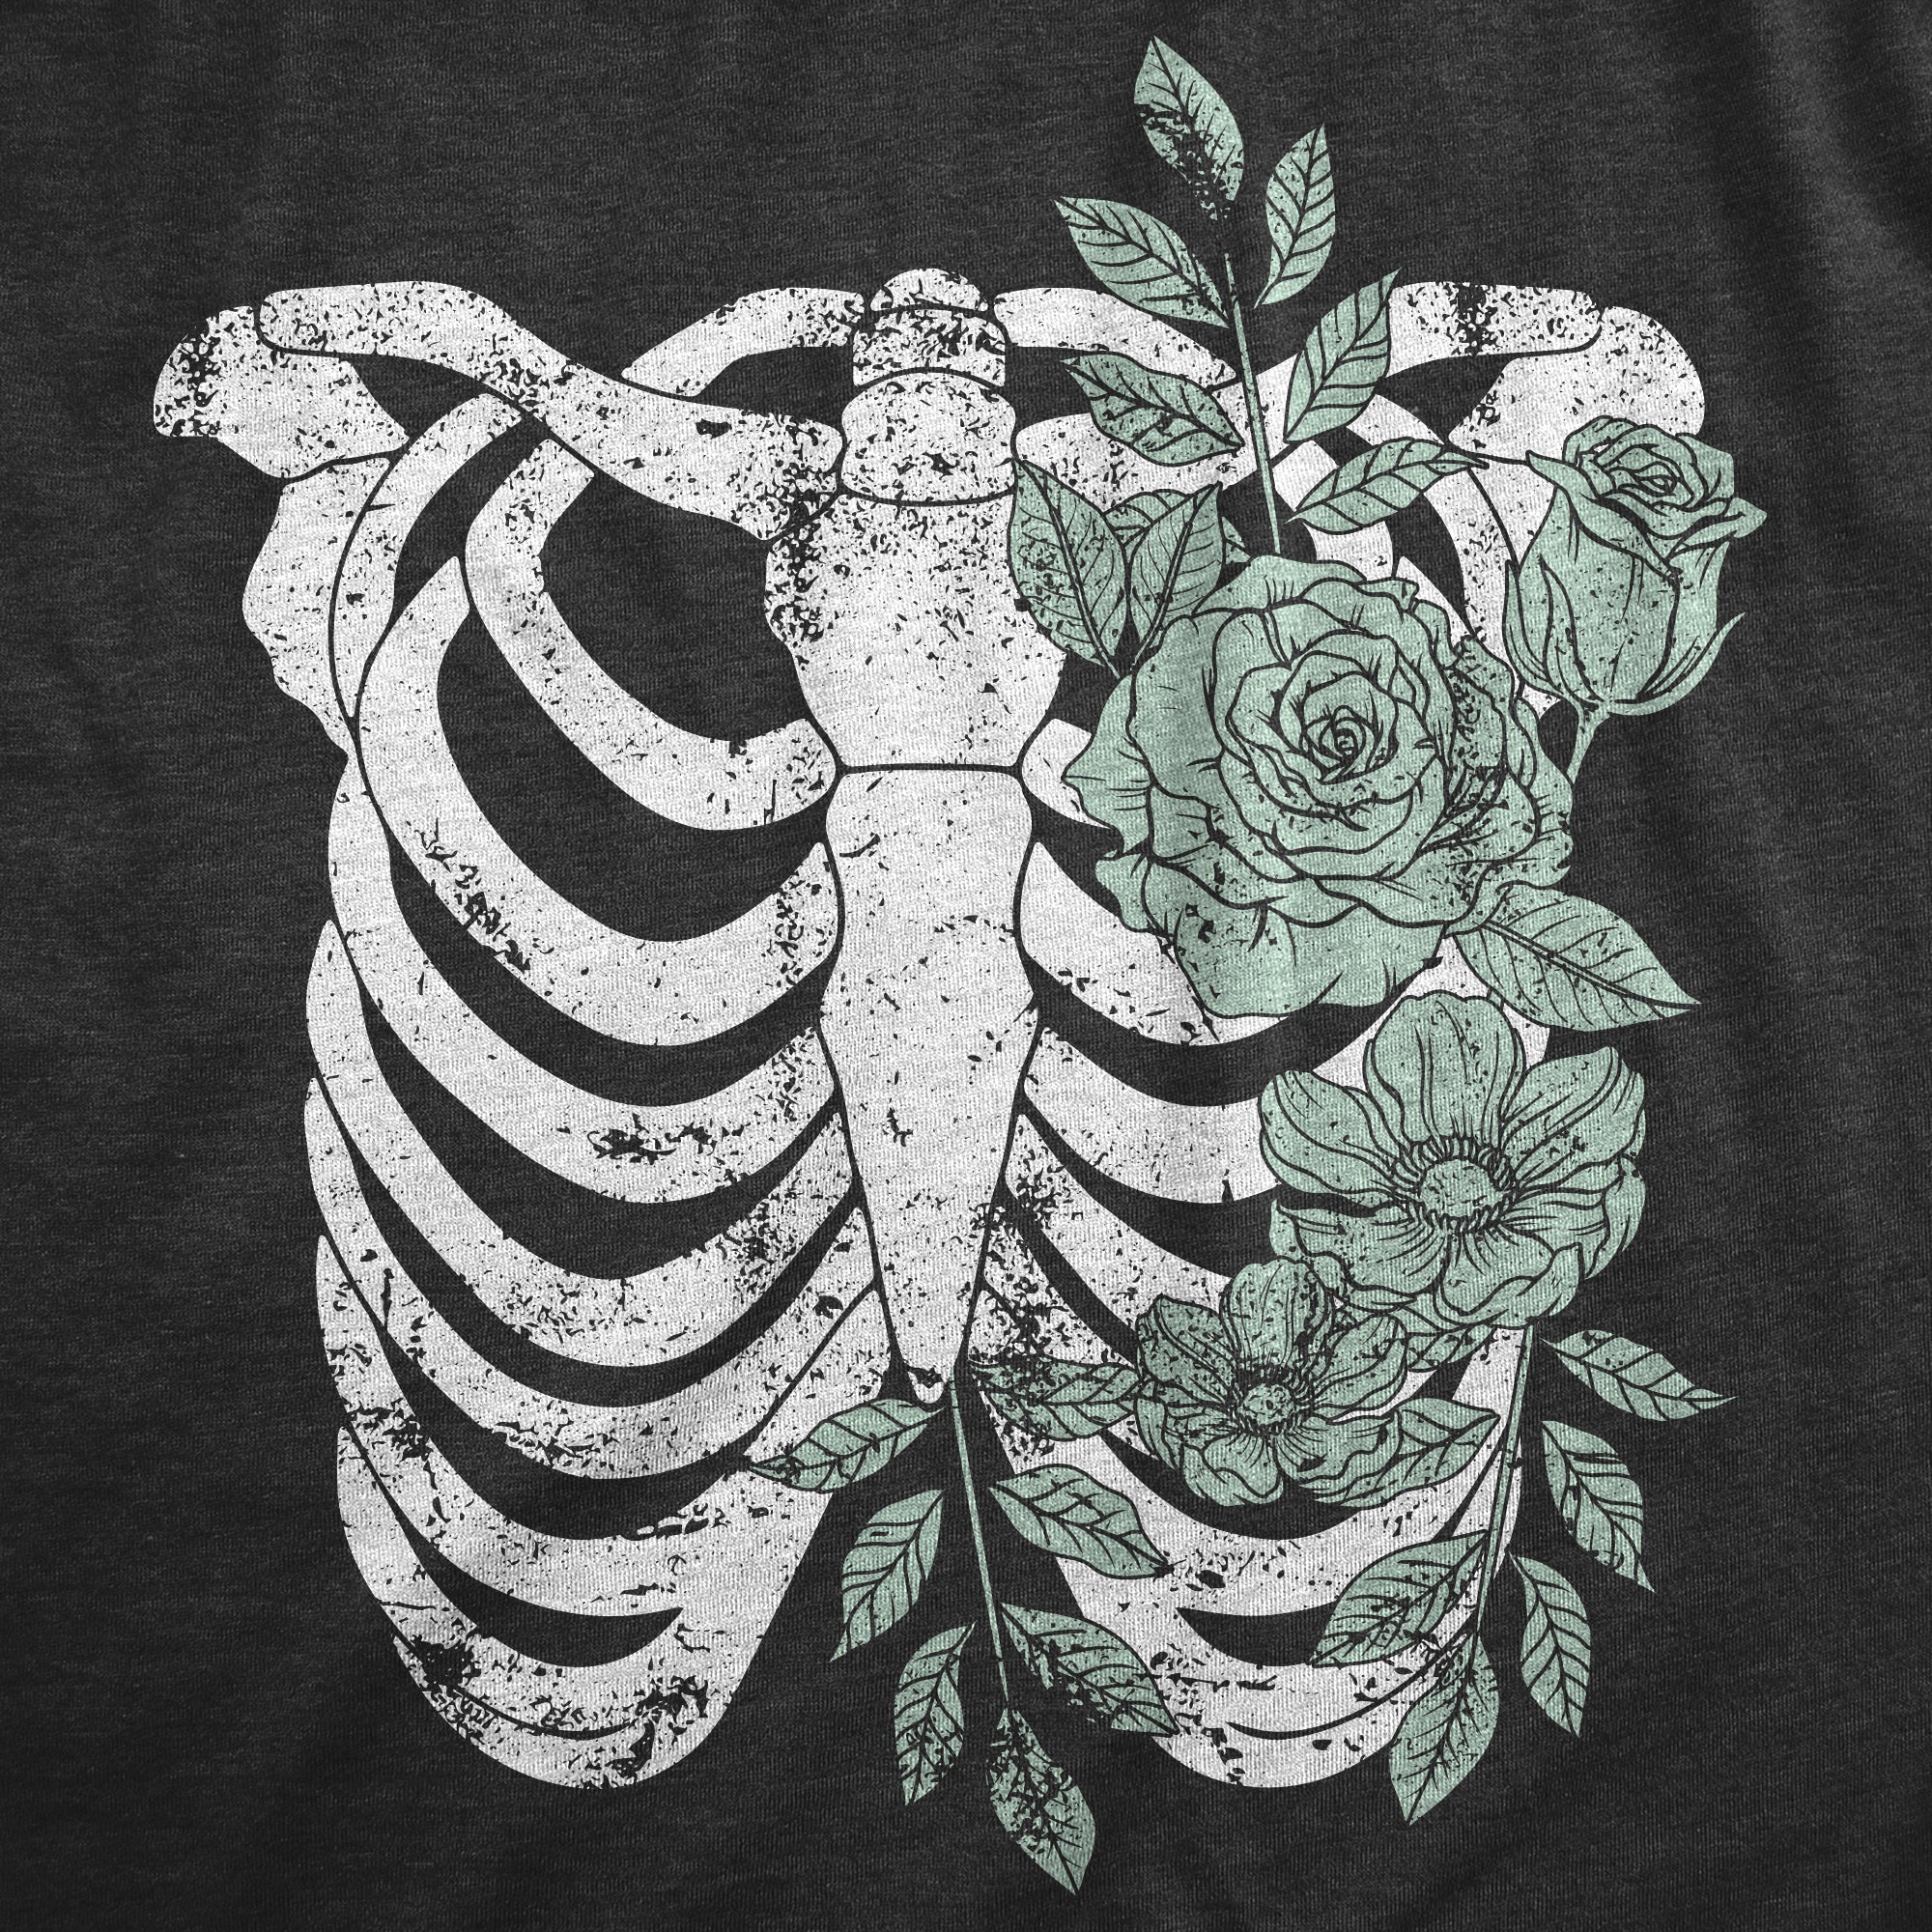 Funny Heather Black - RIBCAGE Floral Ribcage Womens T Shirt Nerdy Halloween Tee